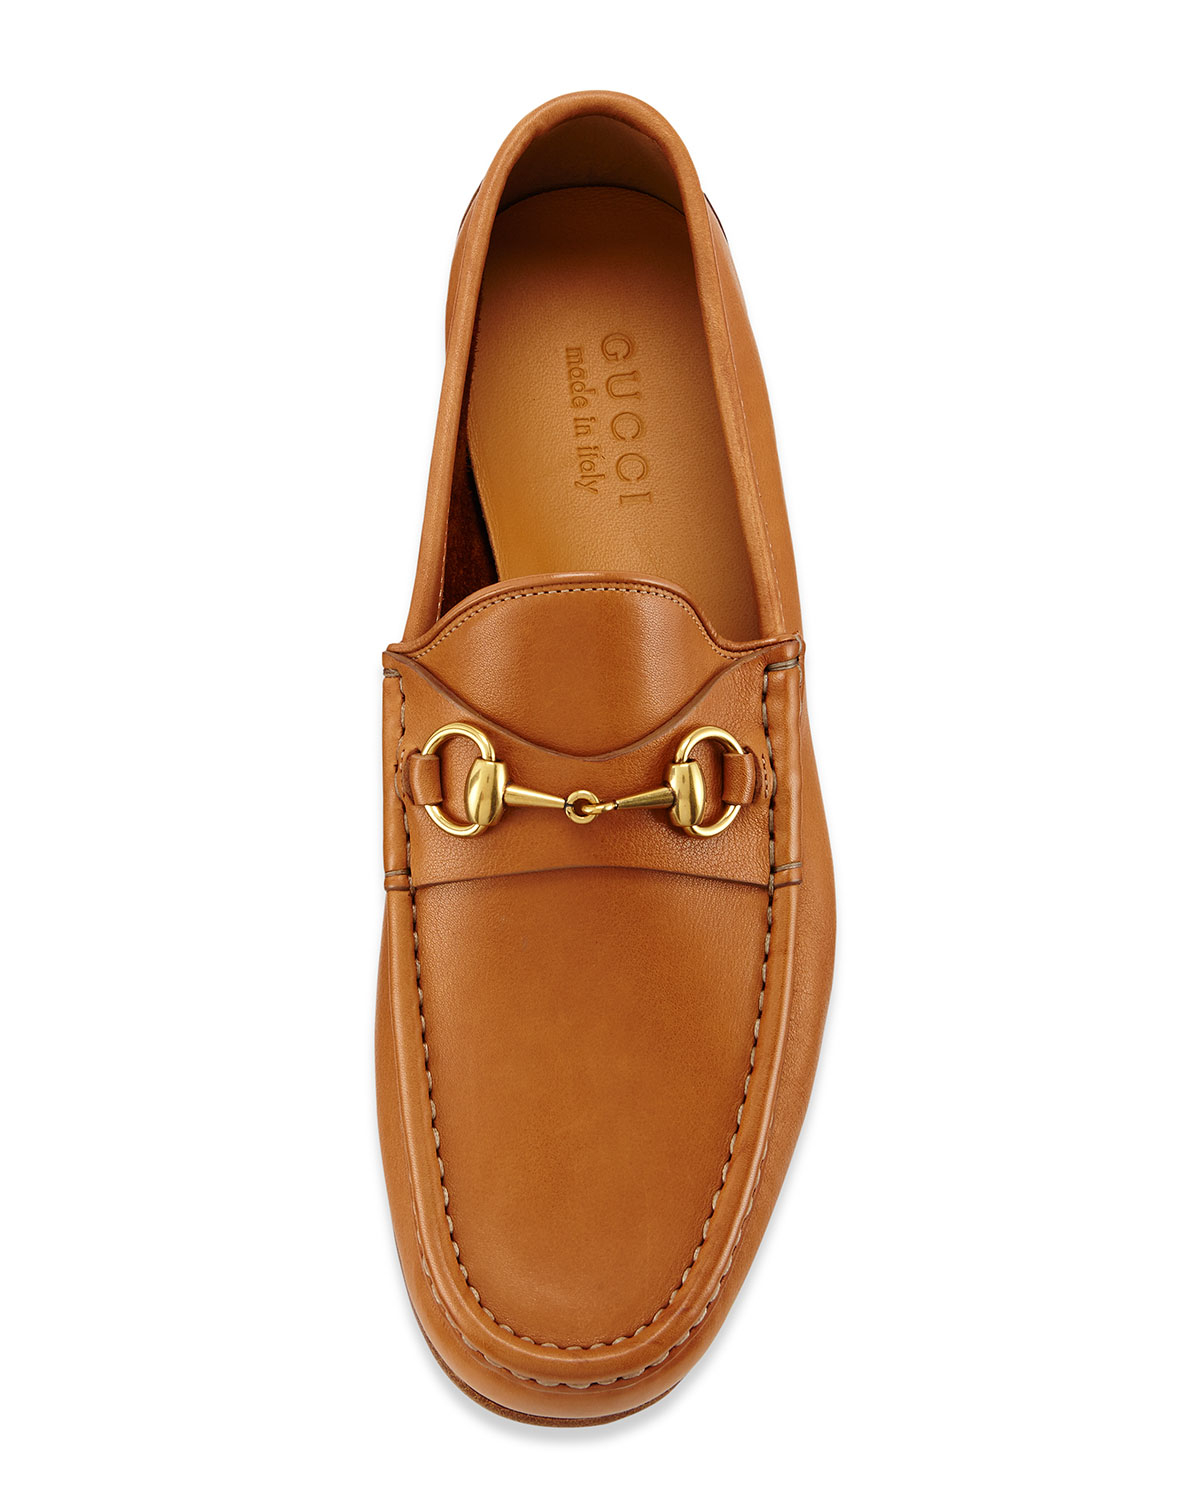 Gucci Horsebit Leather Loafers in Brown - Lyst